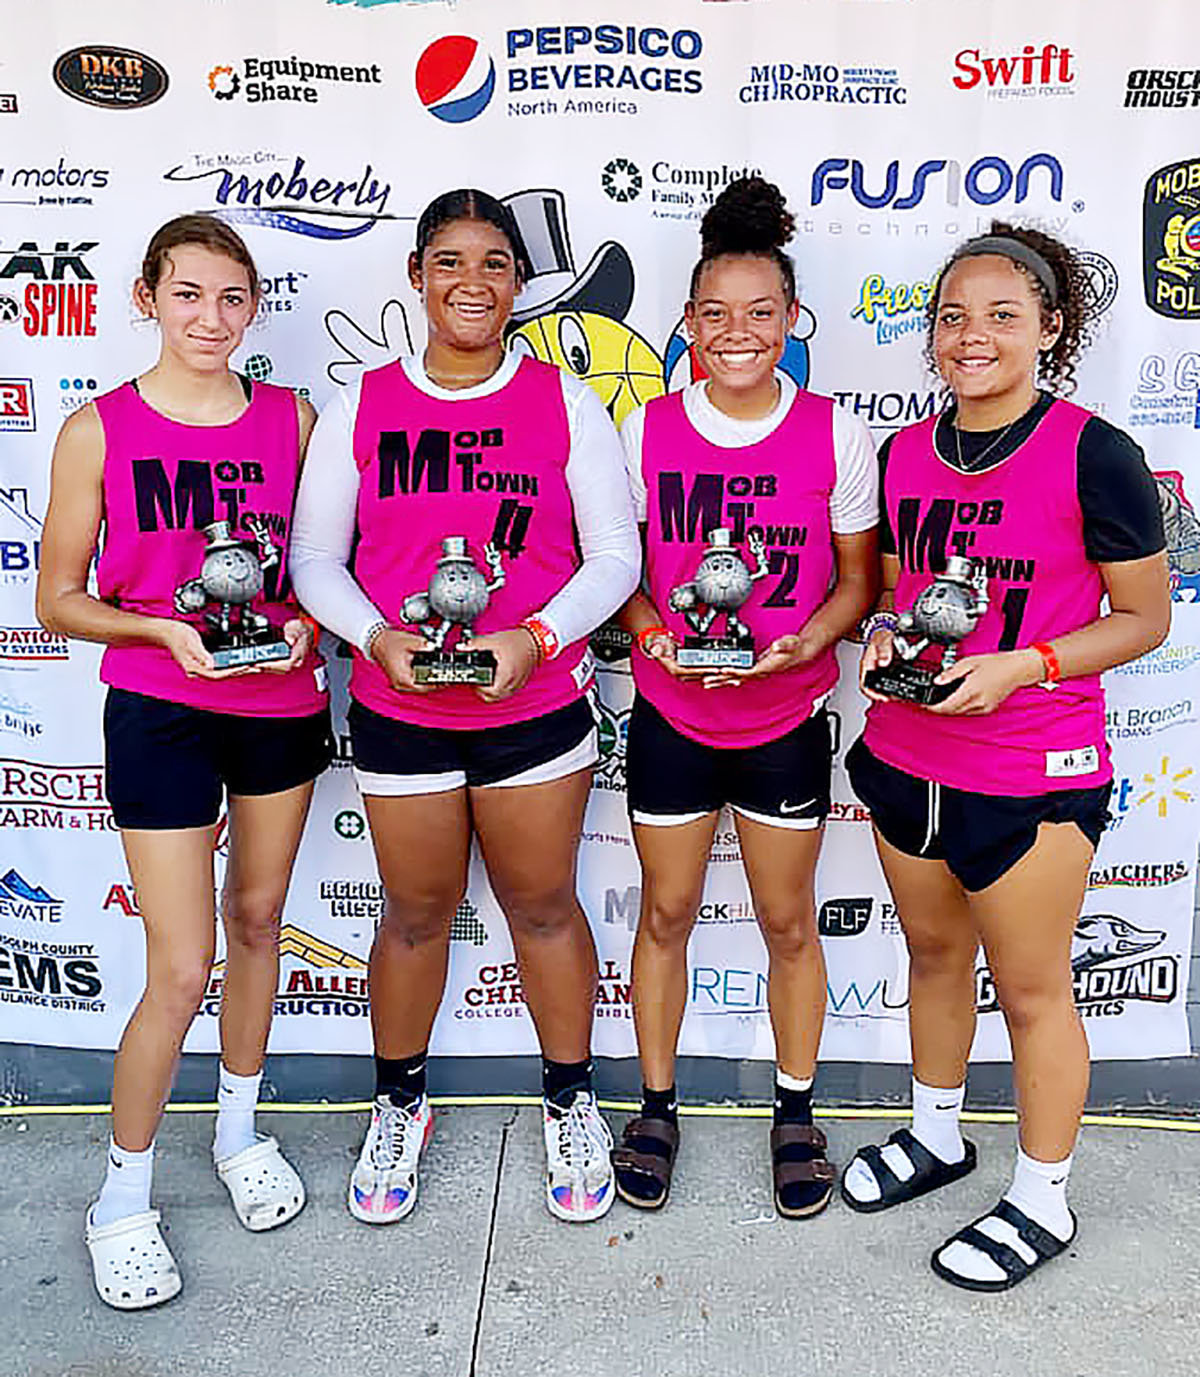 Mob Town took second place in the girls’ 13-14 age division. The team was composed of, from left, Olivia Dunwoody, Kyia Tydings, Ariyonna Gross and Jordan Tydings.